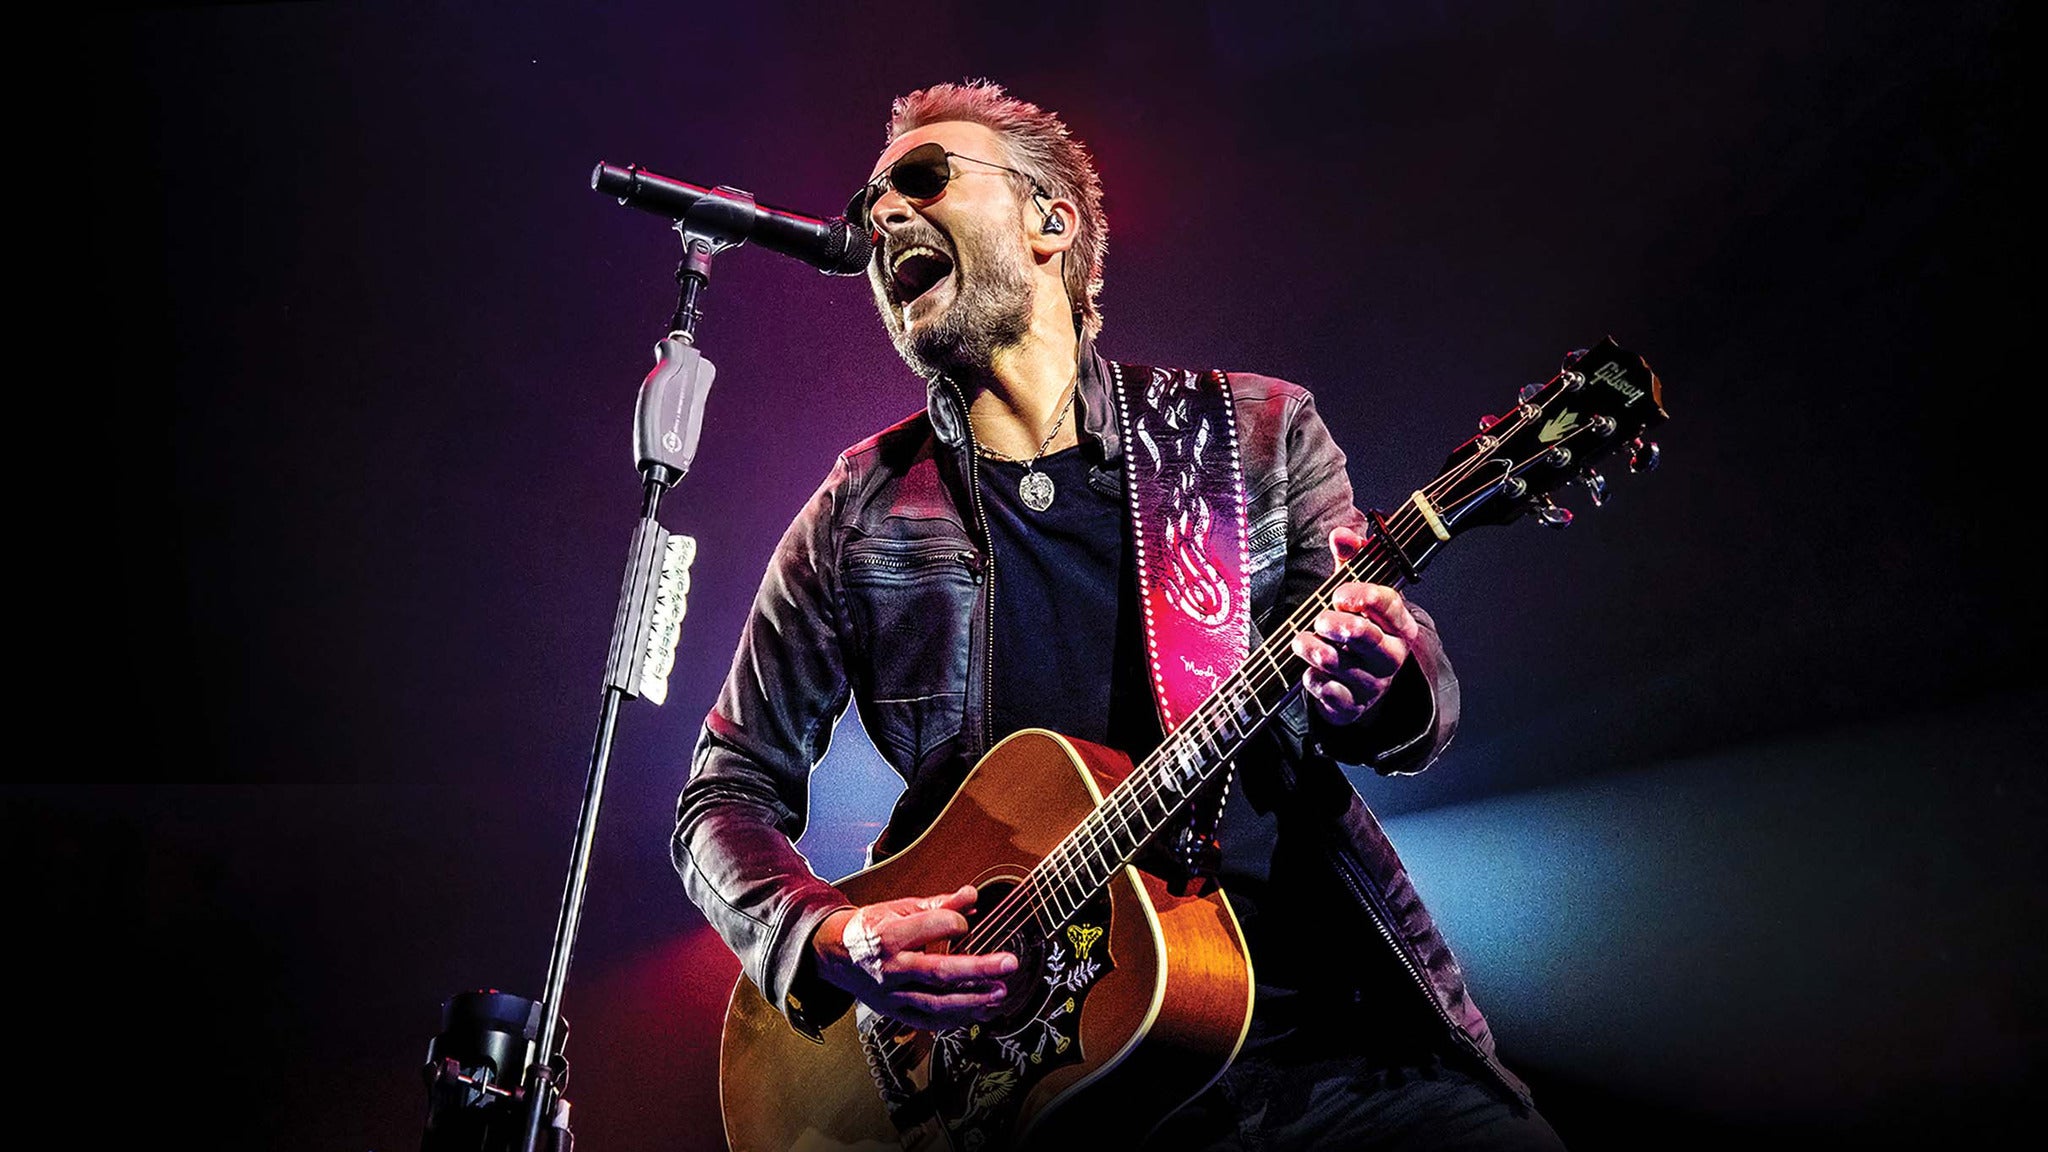 Eric Church with Morgan Wallen in Minneapolis promo photo for Ticketmaster presale offer code